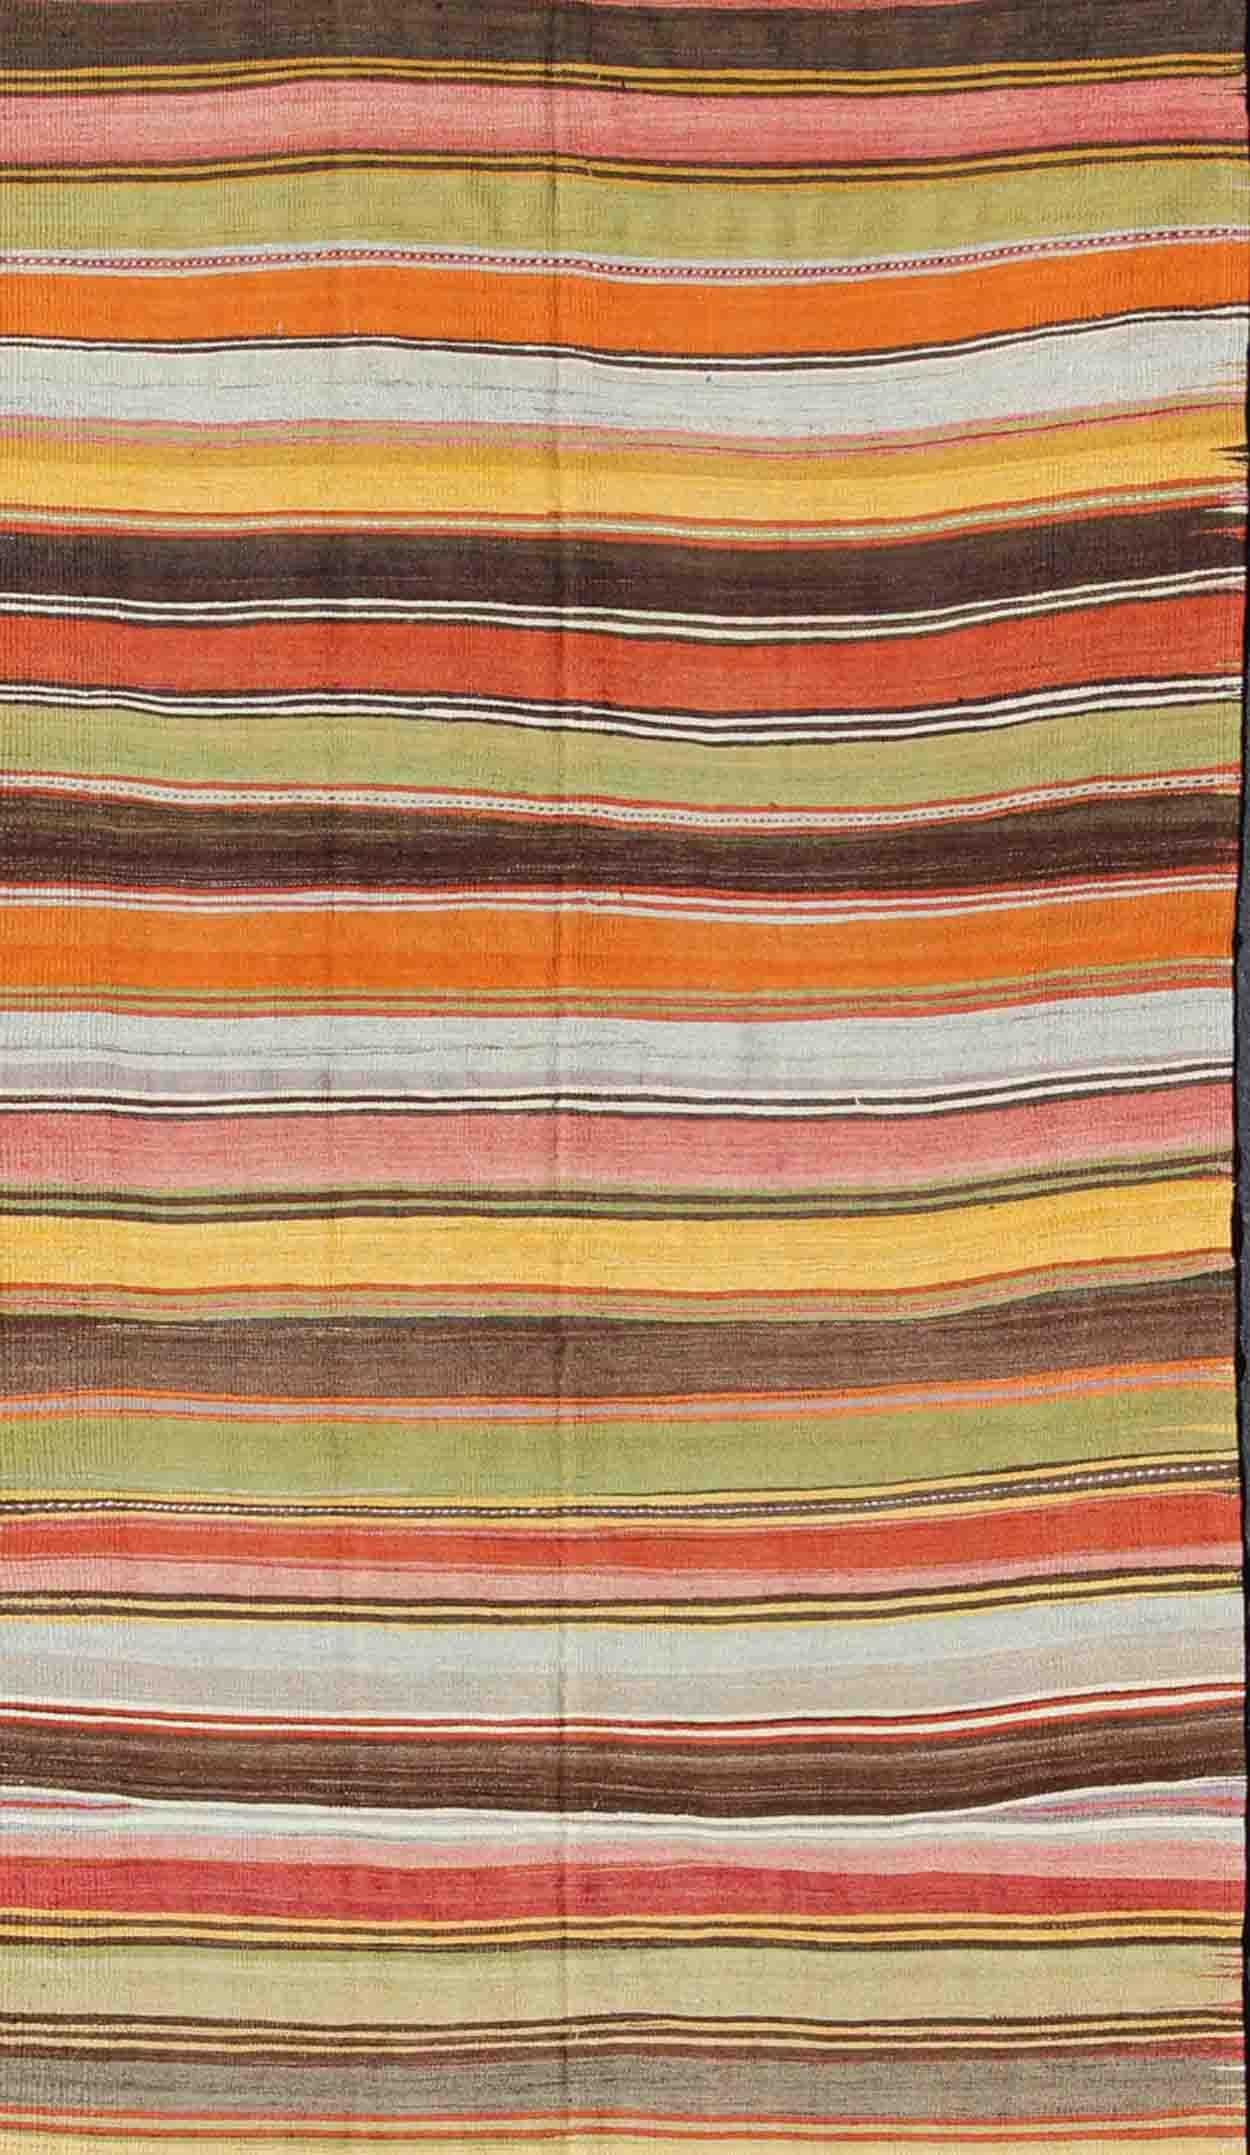 Hand-Woven Colorful Large Gallery Runner Kilim Flat-Weave Rug with Horizontal Stripe Design For Sale